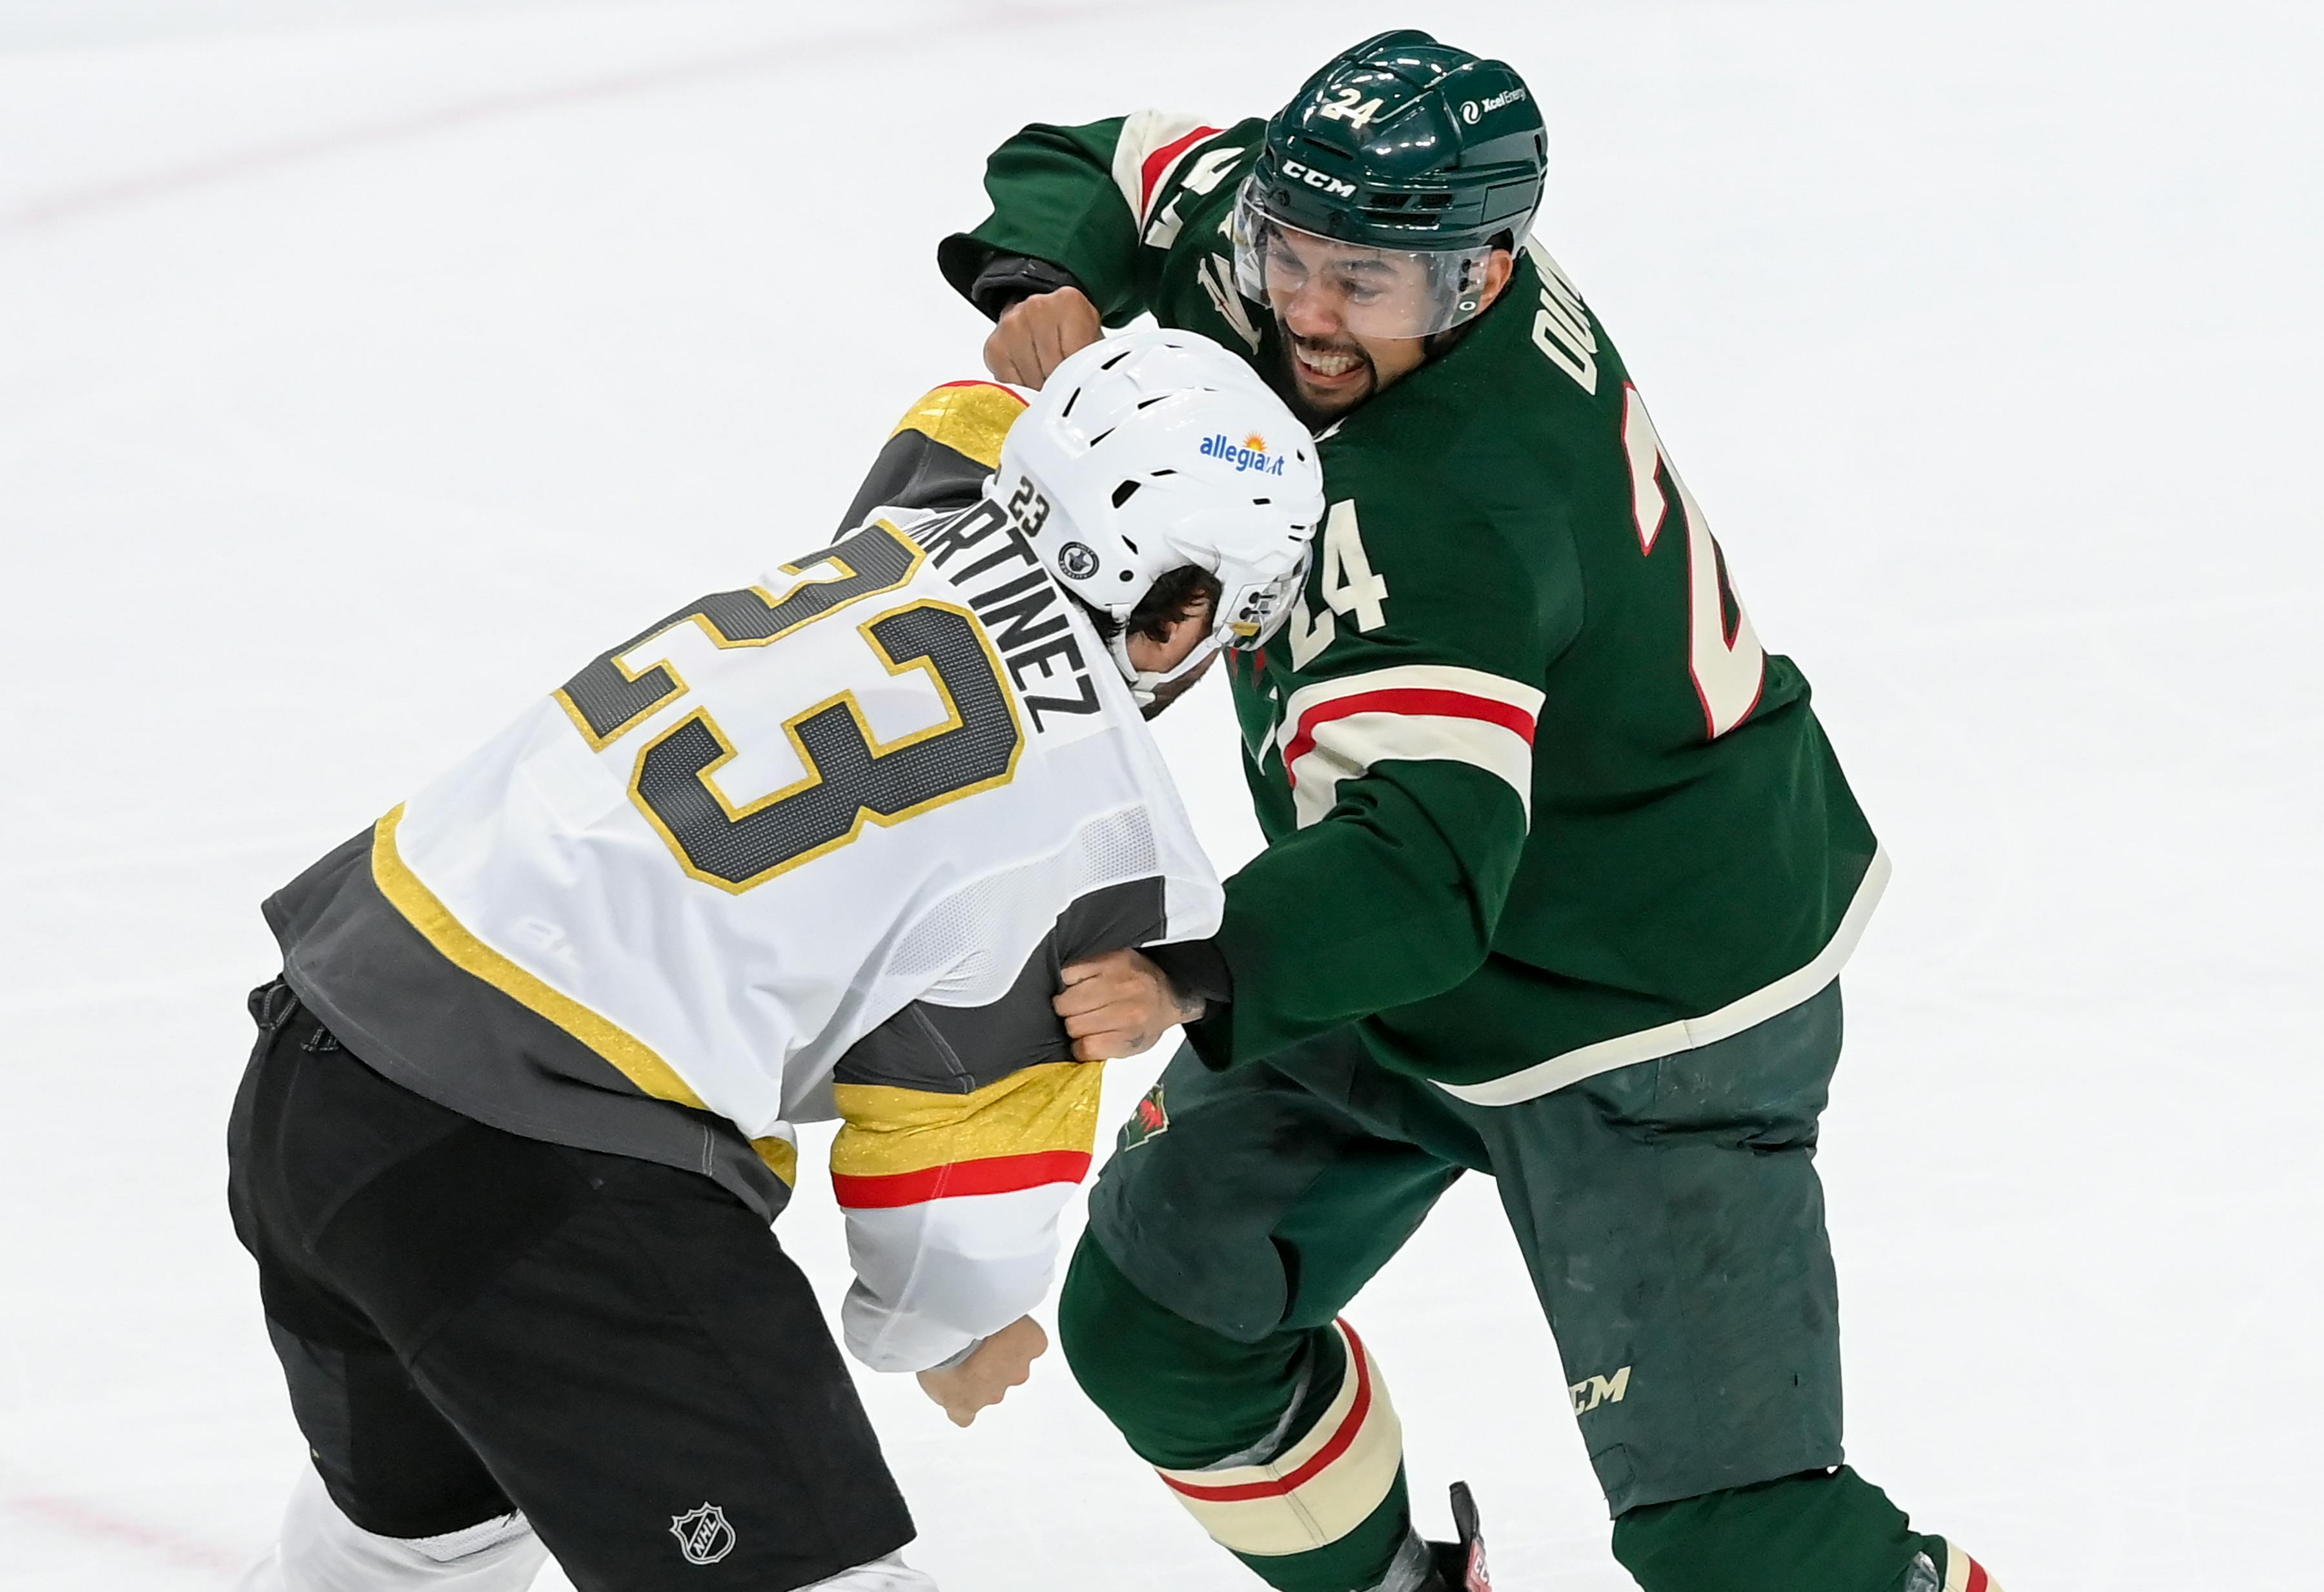 Wild played with determination in Game 6 and takes momentum into